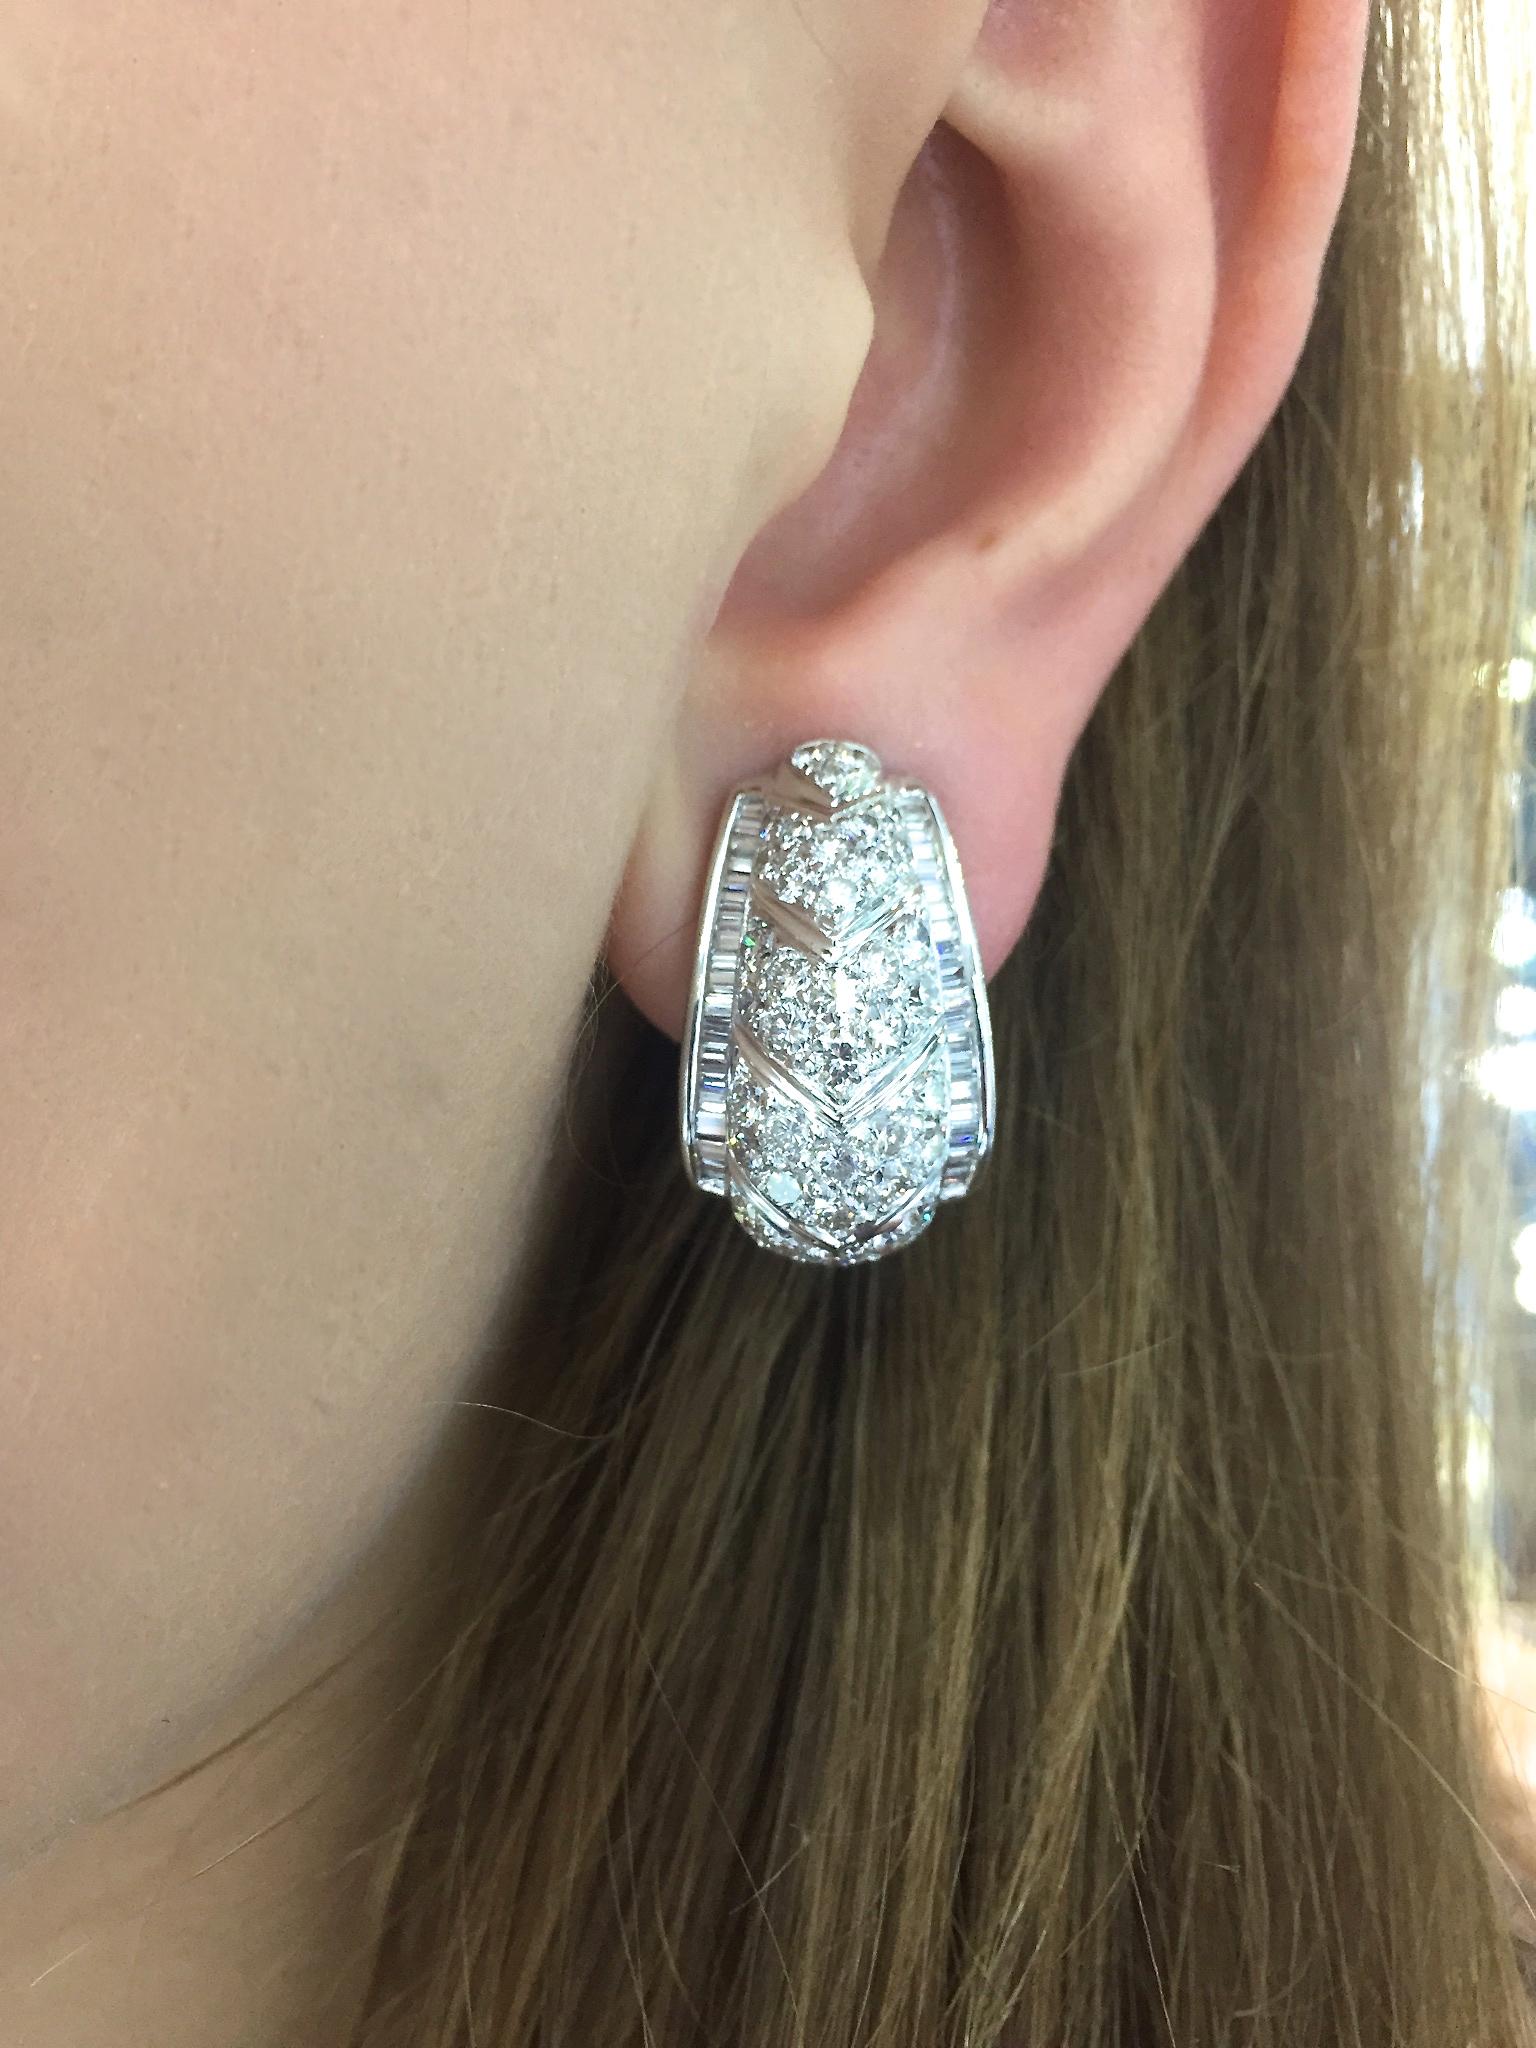 Classic Diamond Clip on Earrings
V-design large diamond huggie earrings set in 18k white gold.
Consisting of 76 round brilliant cut diamonds.
Accented on the sides with 74 channel set baguette cut diamonds.
Total diamond weight is approximately